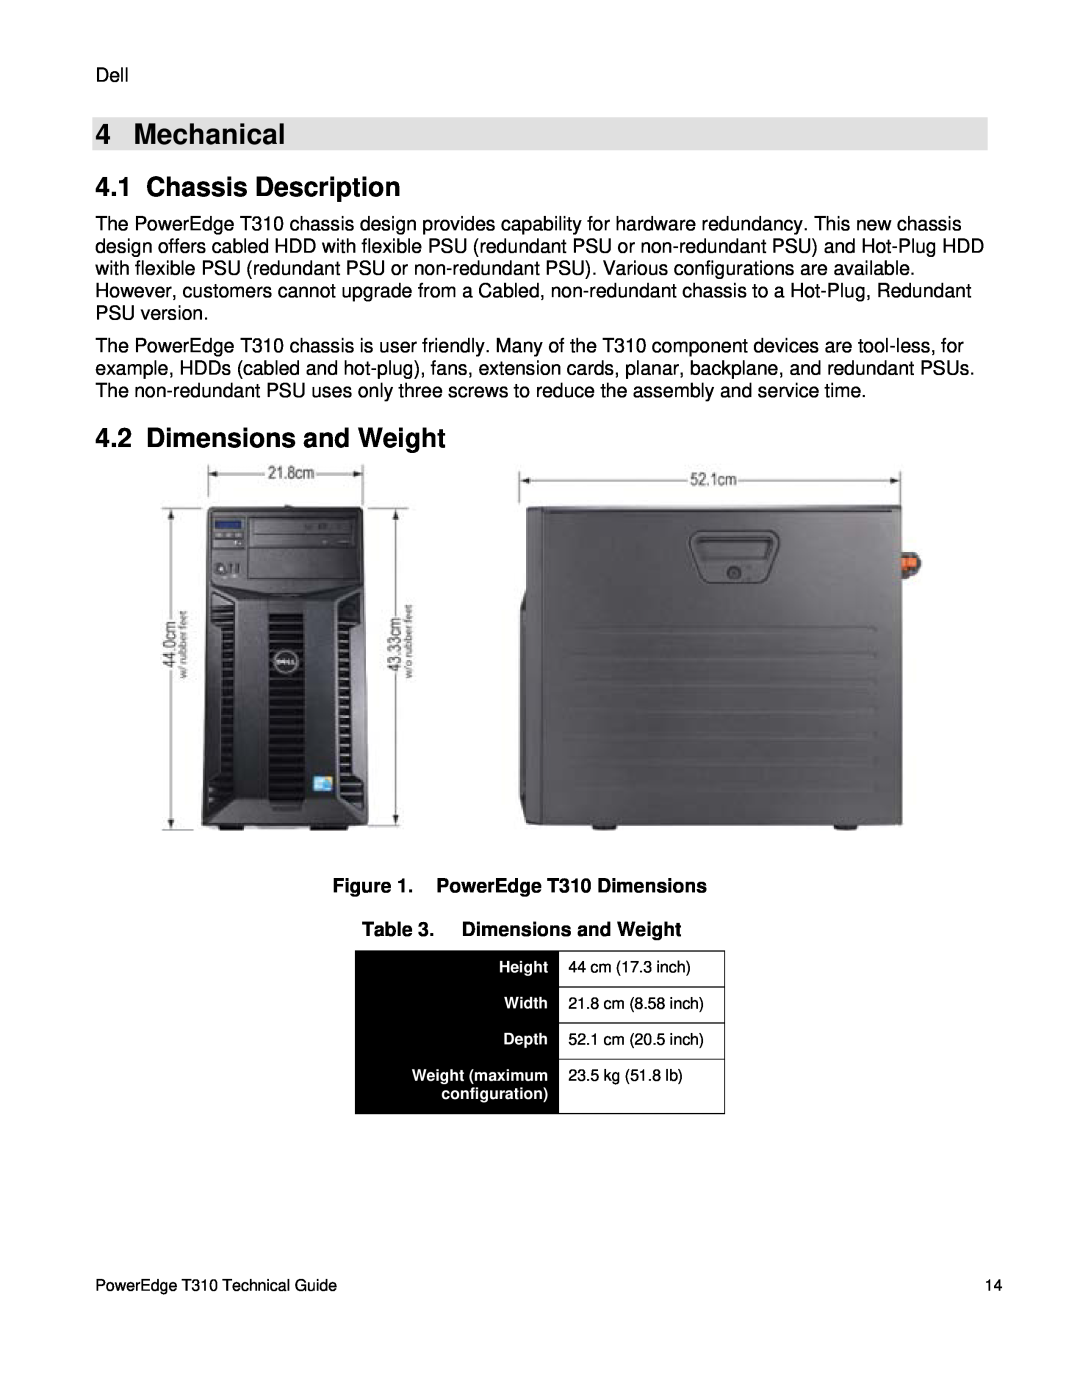 Dell manual Mechanical, Chassis Description, PowerEdge T310 Dimensions . Dimensions and Weight 